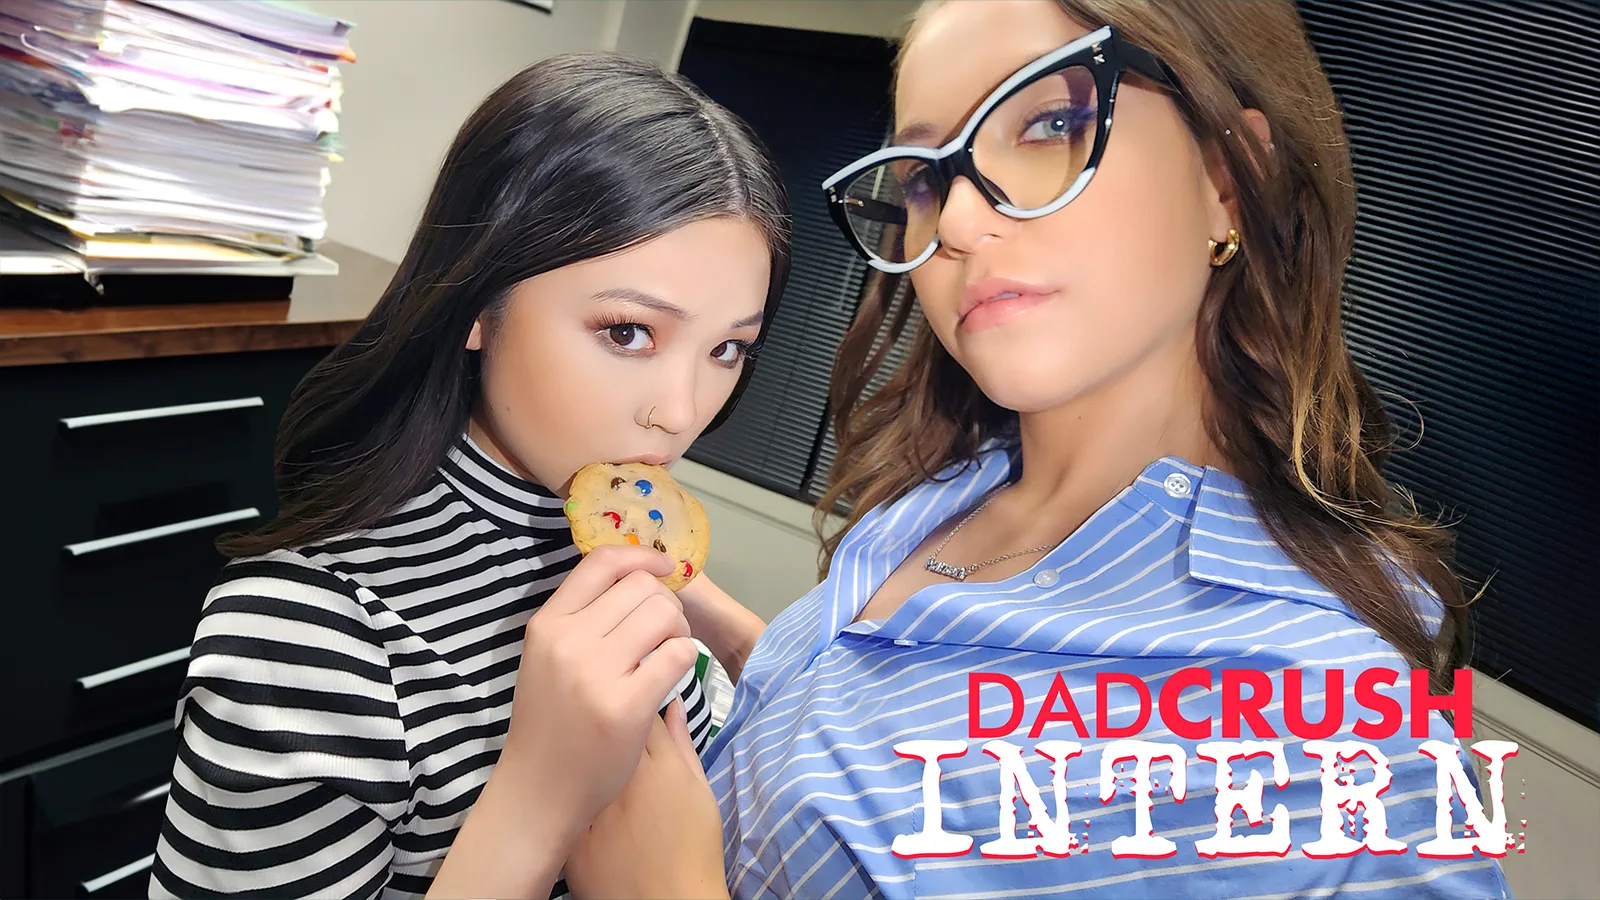 The Intern and More - Dadcrush